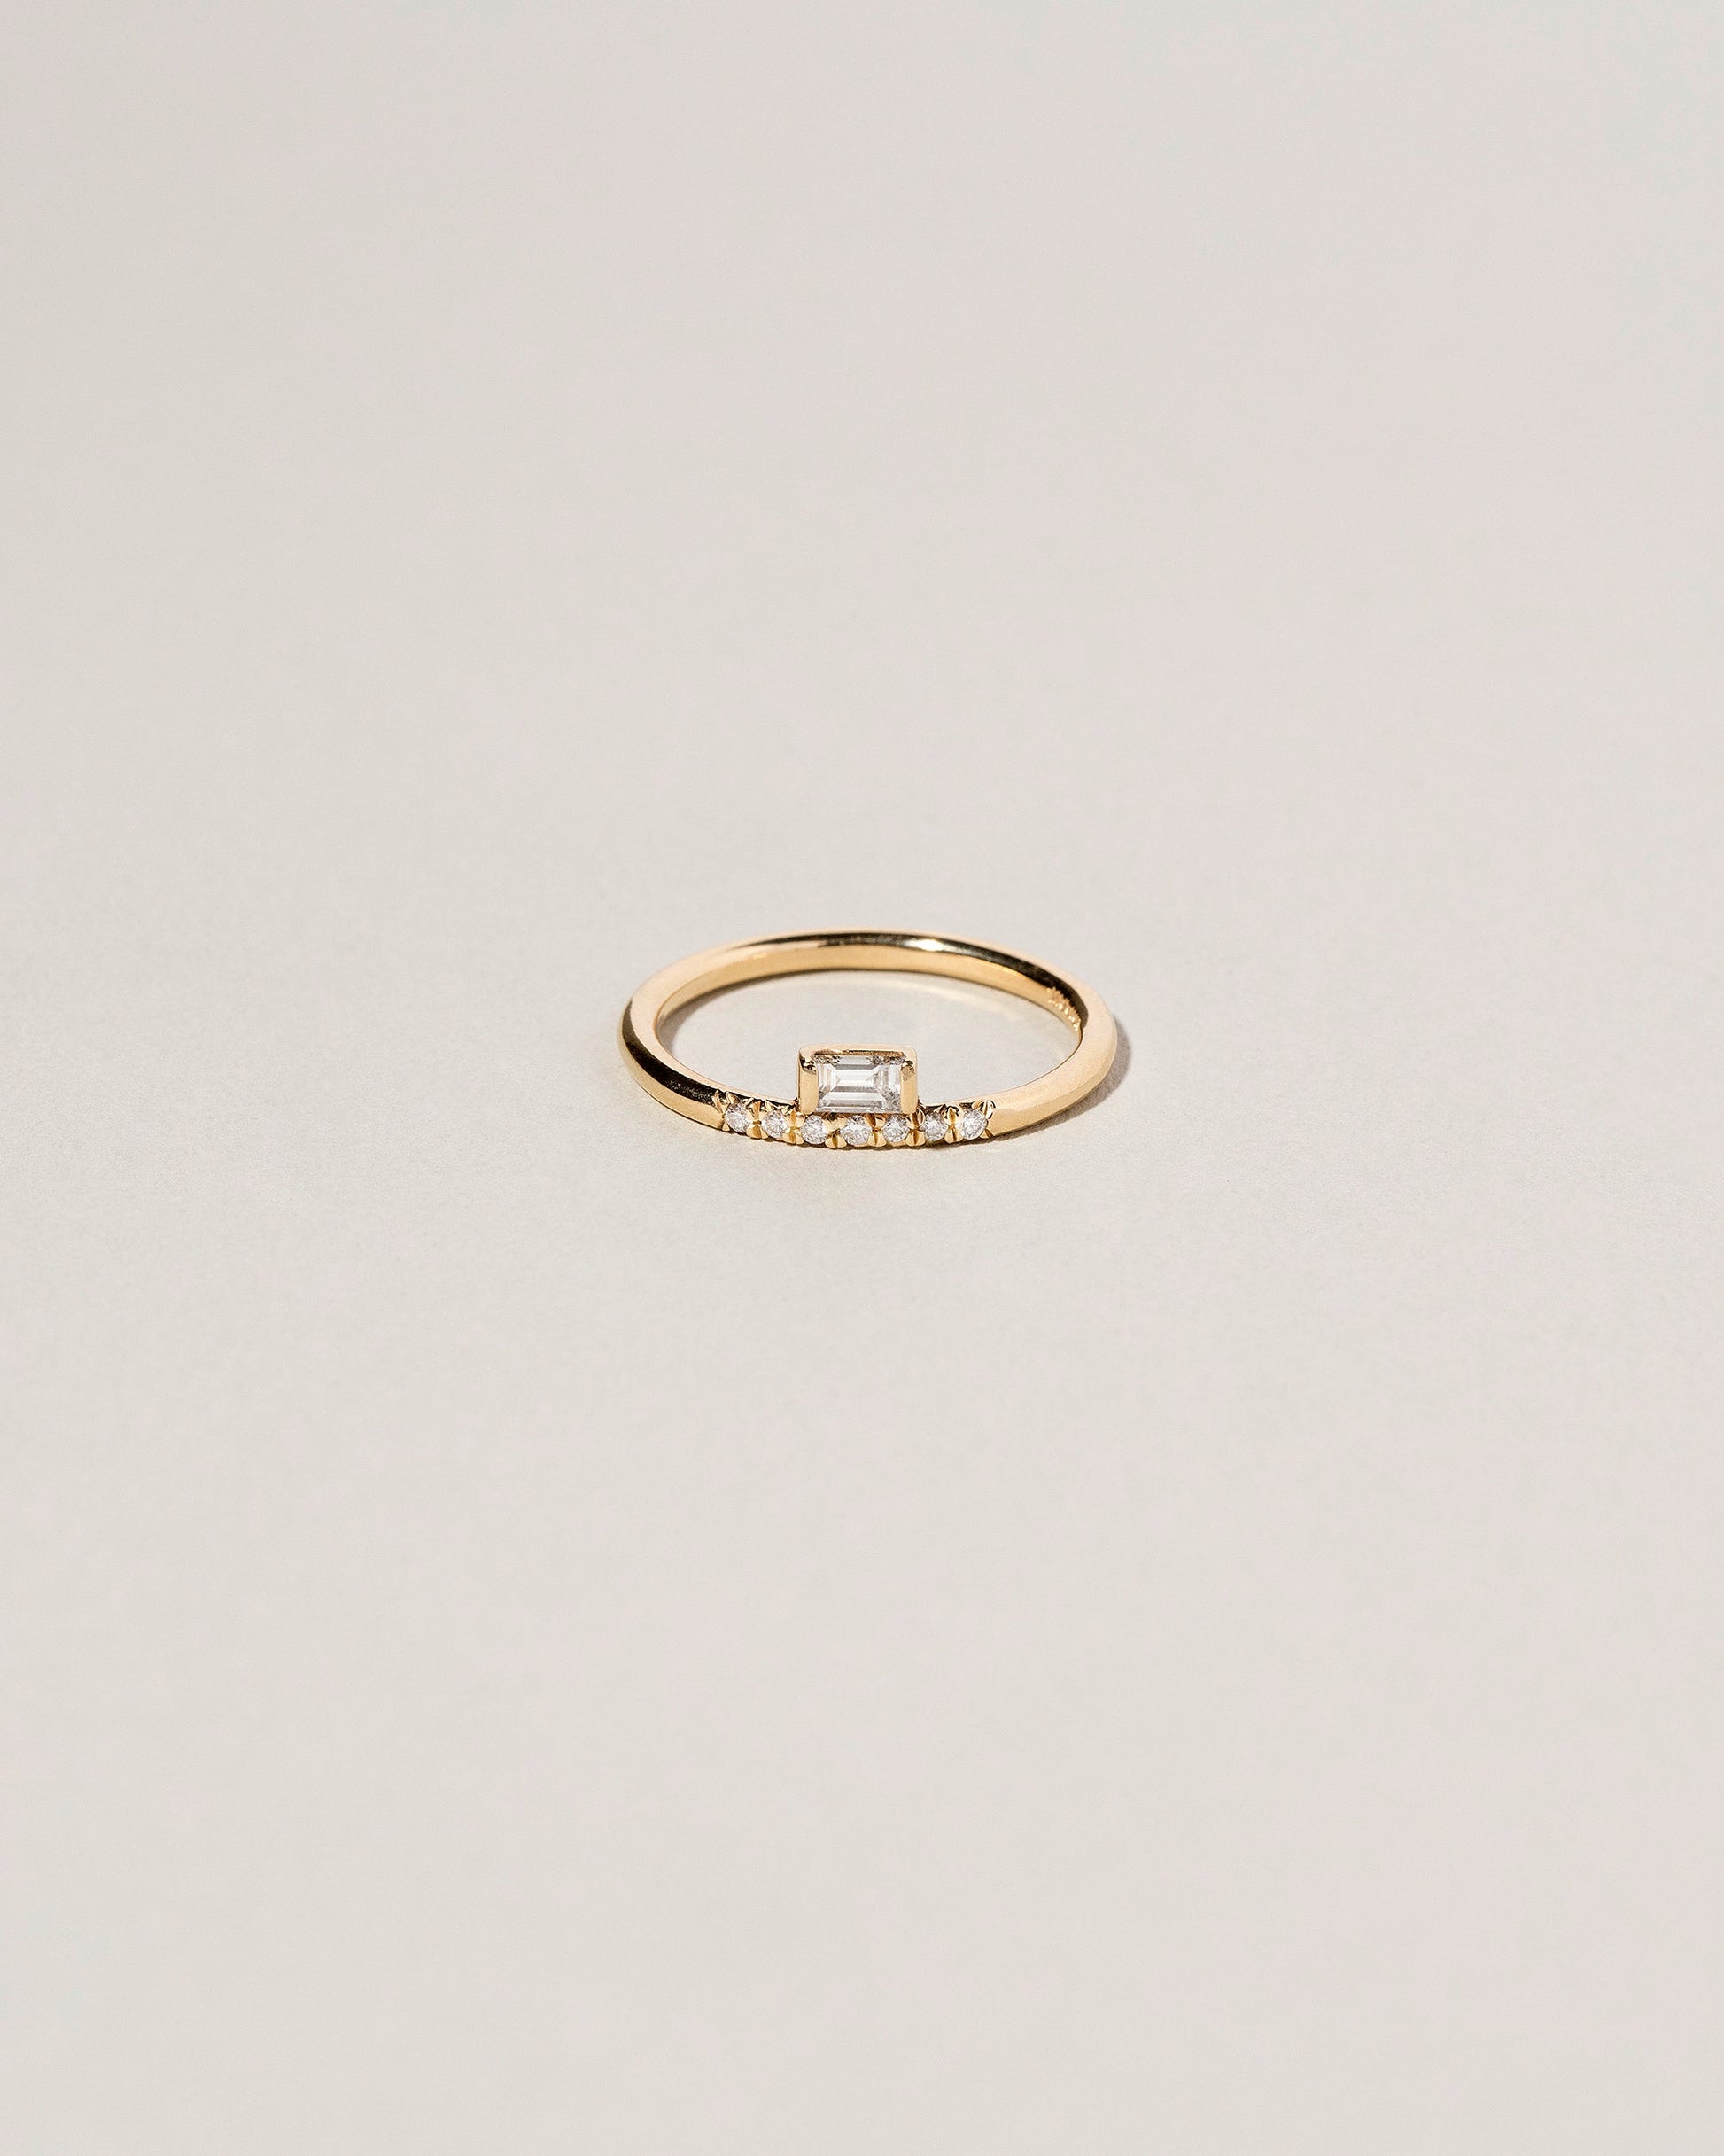  Stacked Ring - Baguette on light color background.